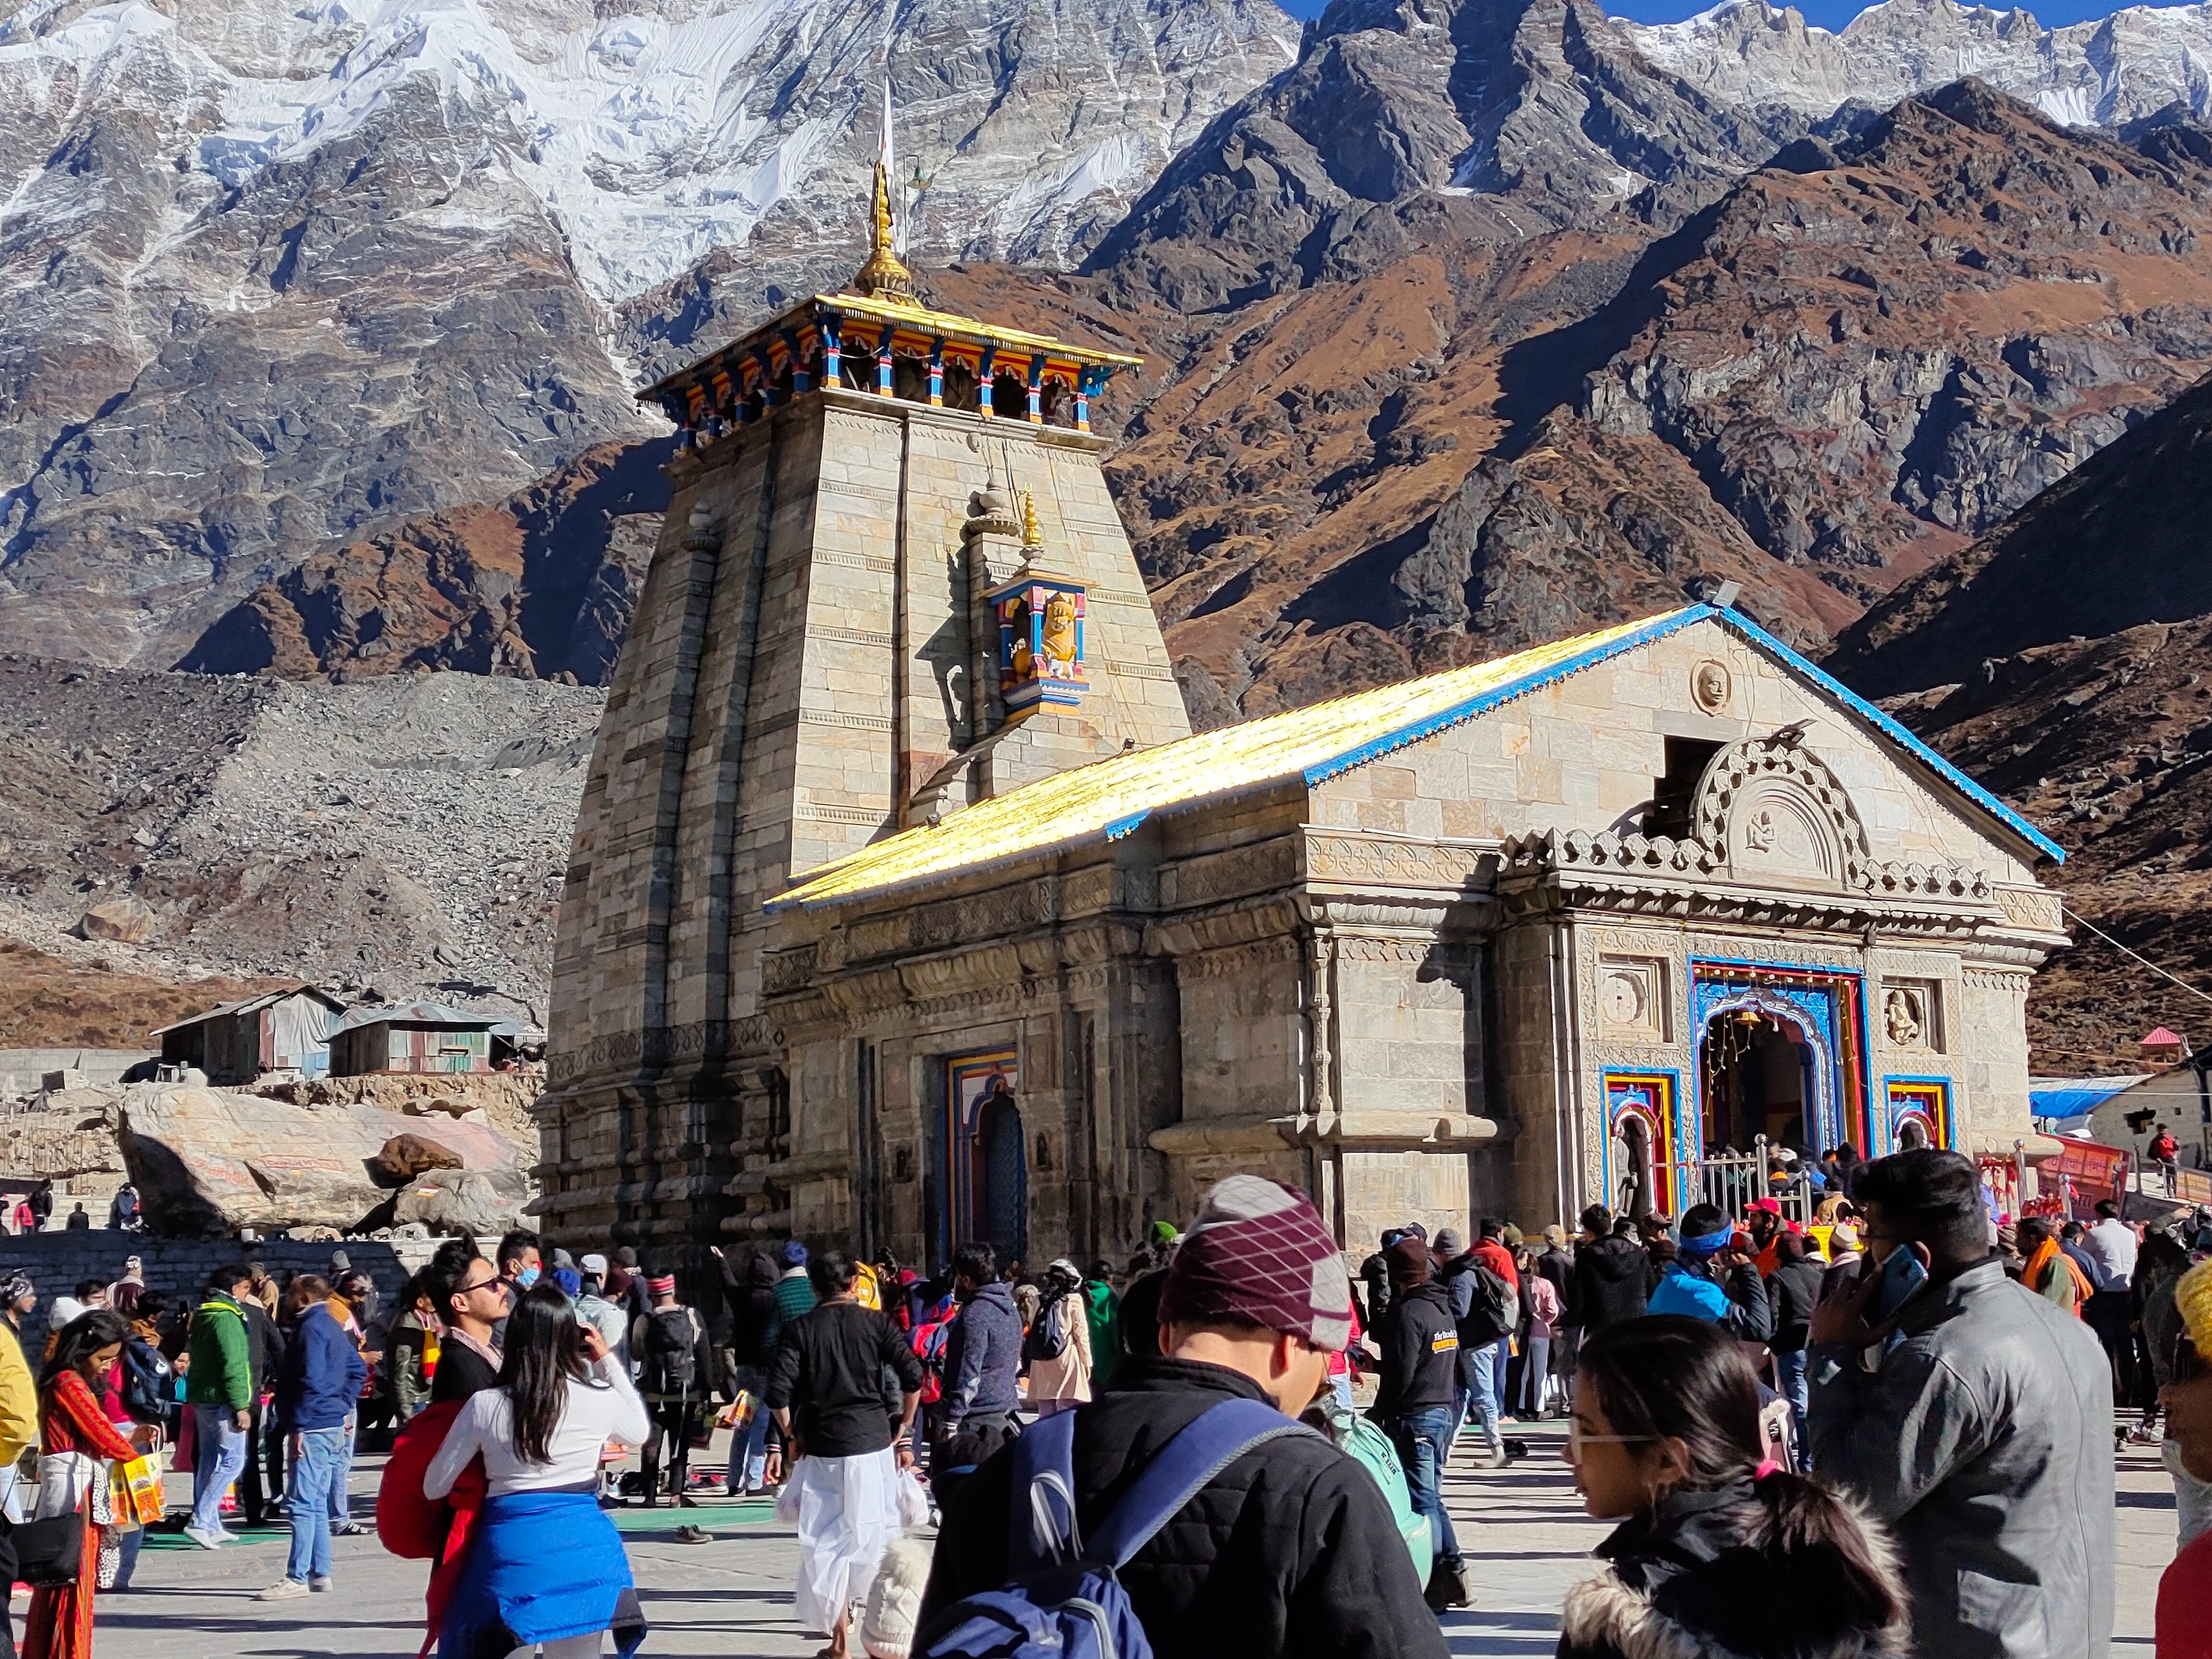 Best Options to Stay in Kedarnath - Hotels, Ashrams and Cottages